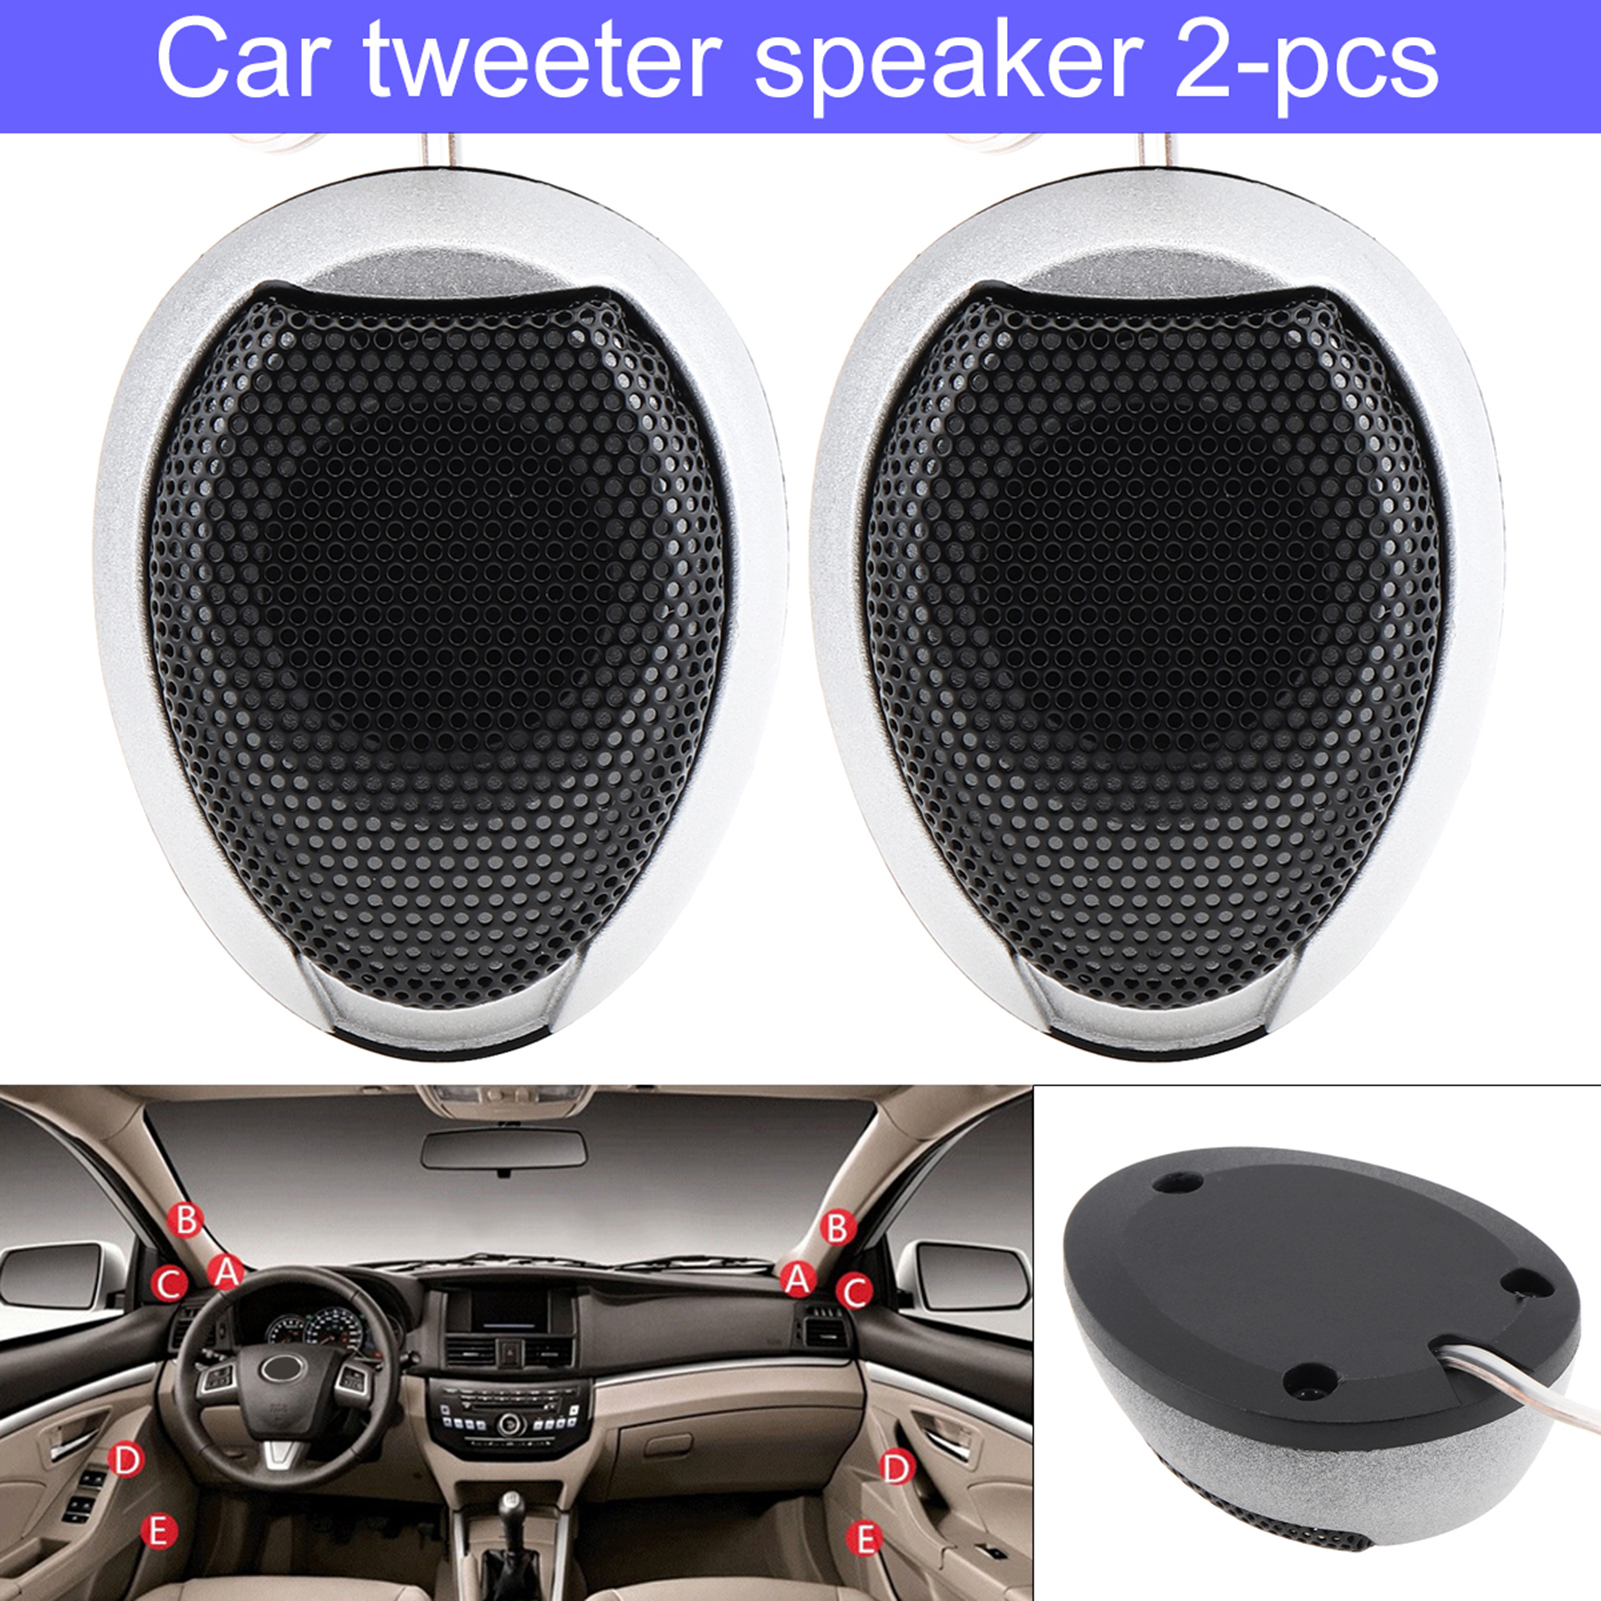 Dcenta Universal 2pcs 1000W High Efficiency Mini Dome Tweeter Speakers for Car Audio System - image 2 of 7